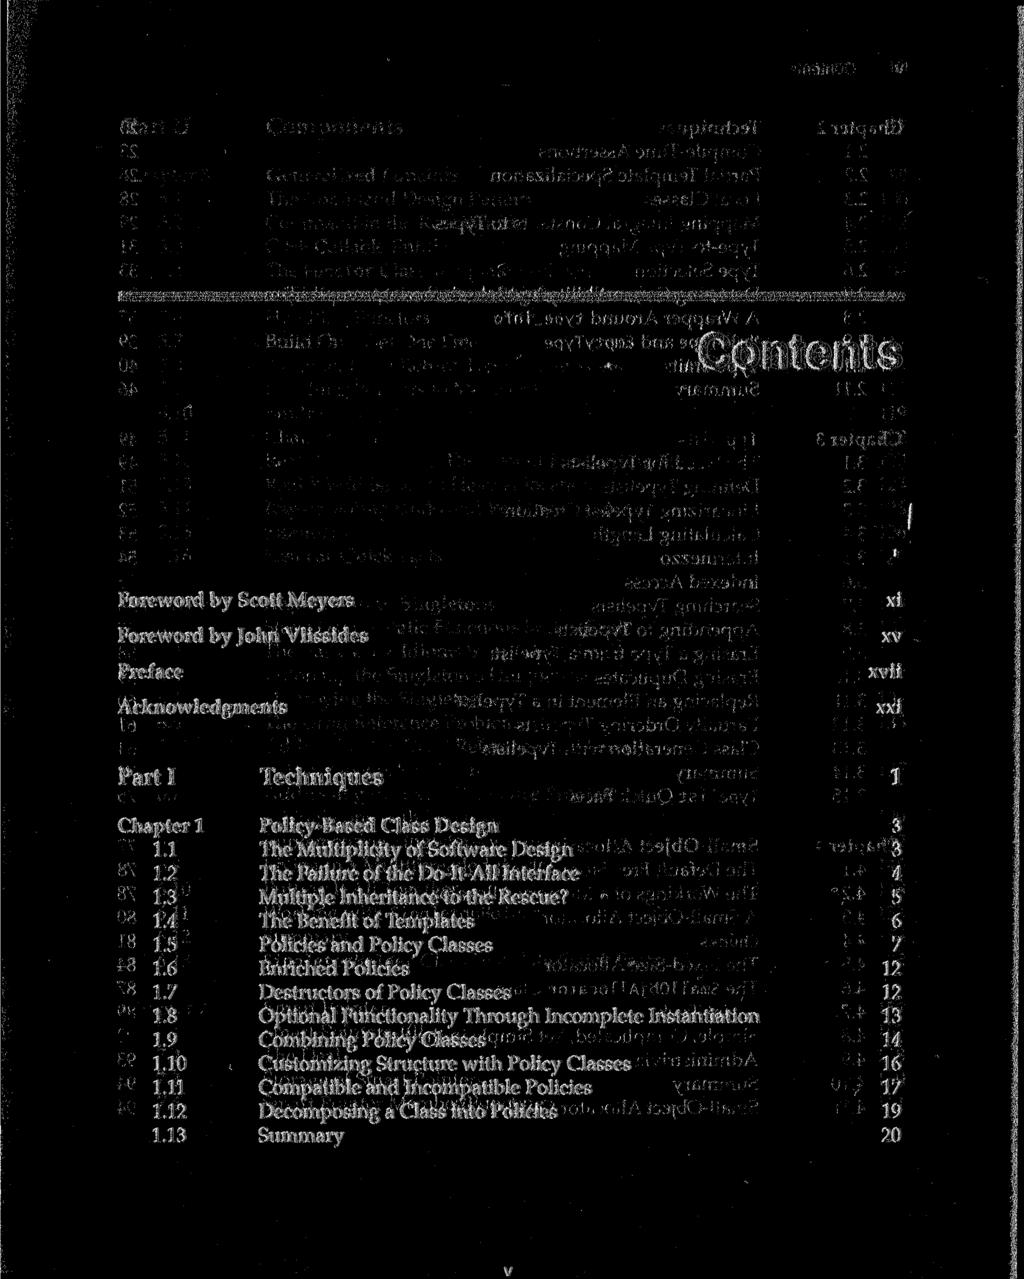 Contents 1 Foreword by Scott Meyers Foreword by John Vlissides Preface Acknowledgments xi XV xvii xxi Parti Chapter 1 1.1 1.2 1.3 1.4 1.5 1.6 1.7 1.8 1.9 1.10 1.11 1.12 1.